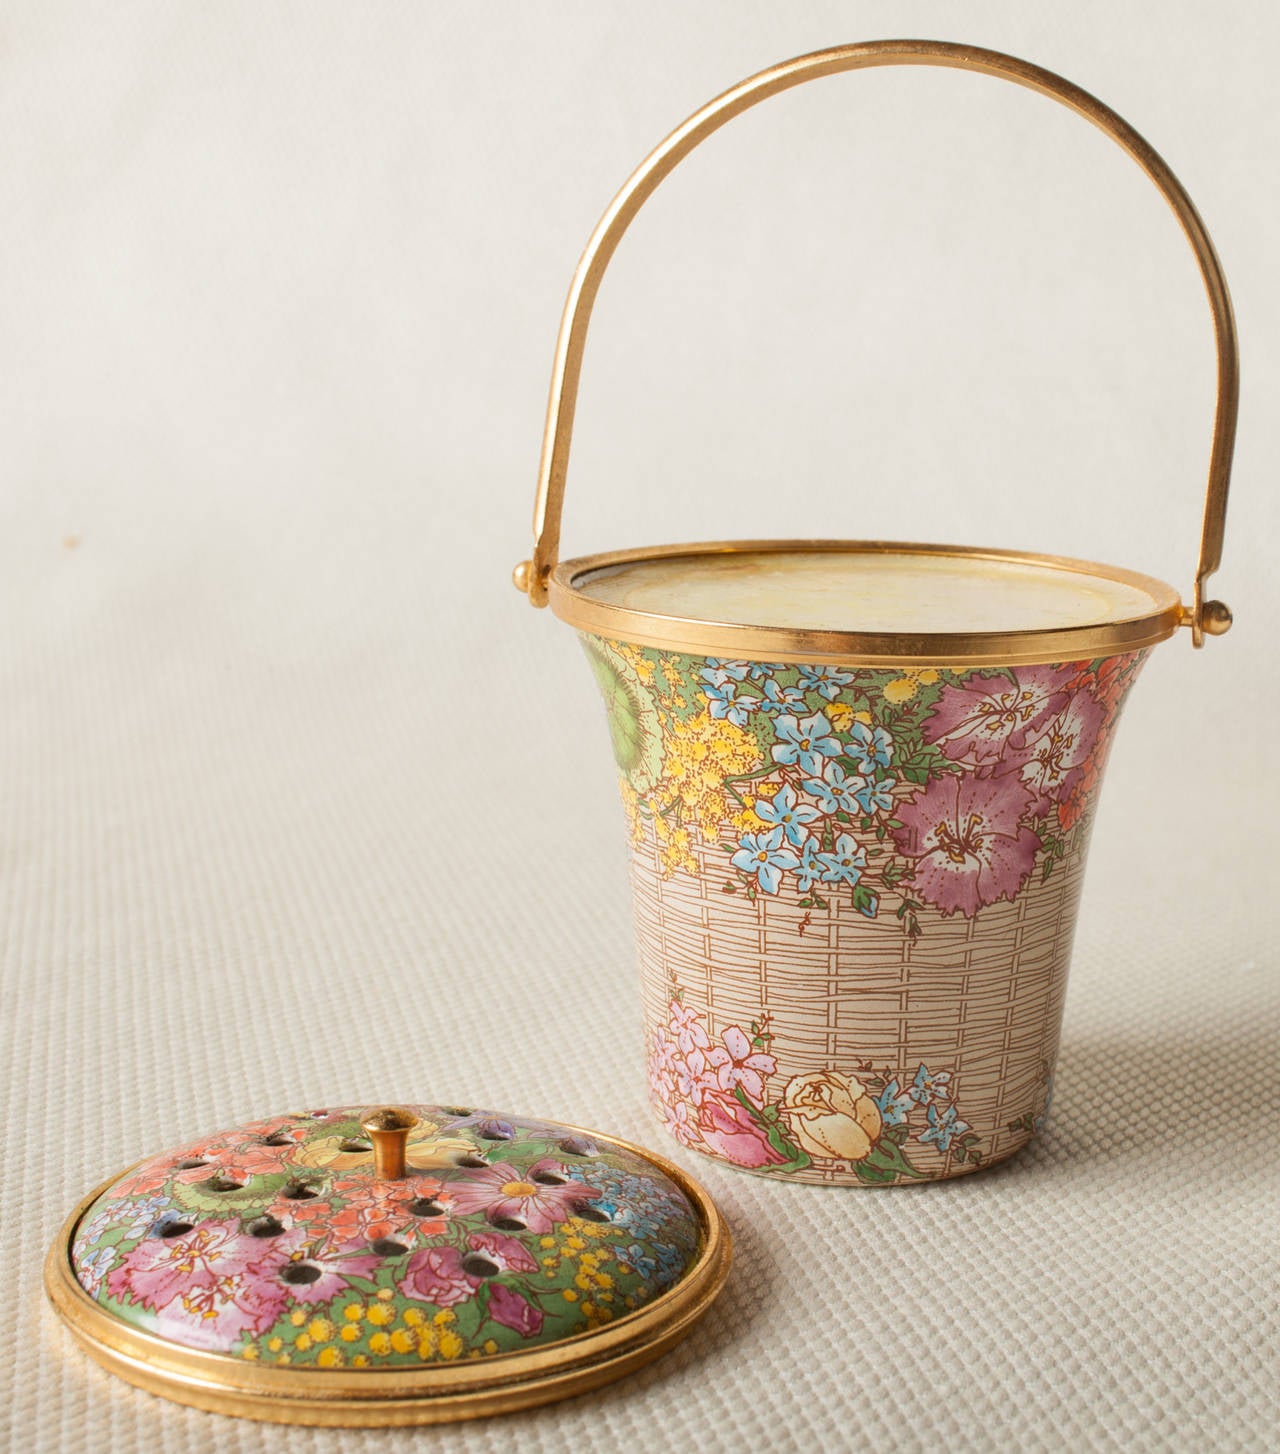 This is a very large piece of enamel work from Halcyon Days. It is in the form of a basket and functions as a potpourri holder. The delicate hand painted flowers are on a ground of wicker forming the basket motif. The handle, rim and knob are